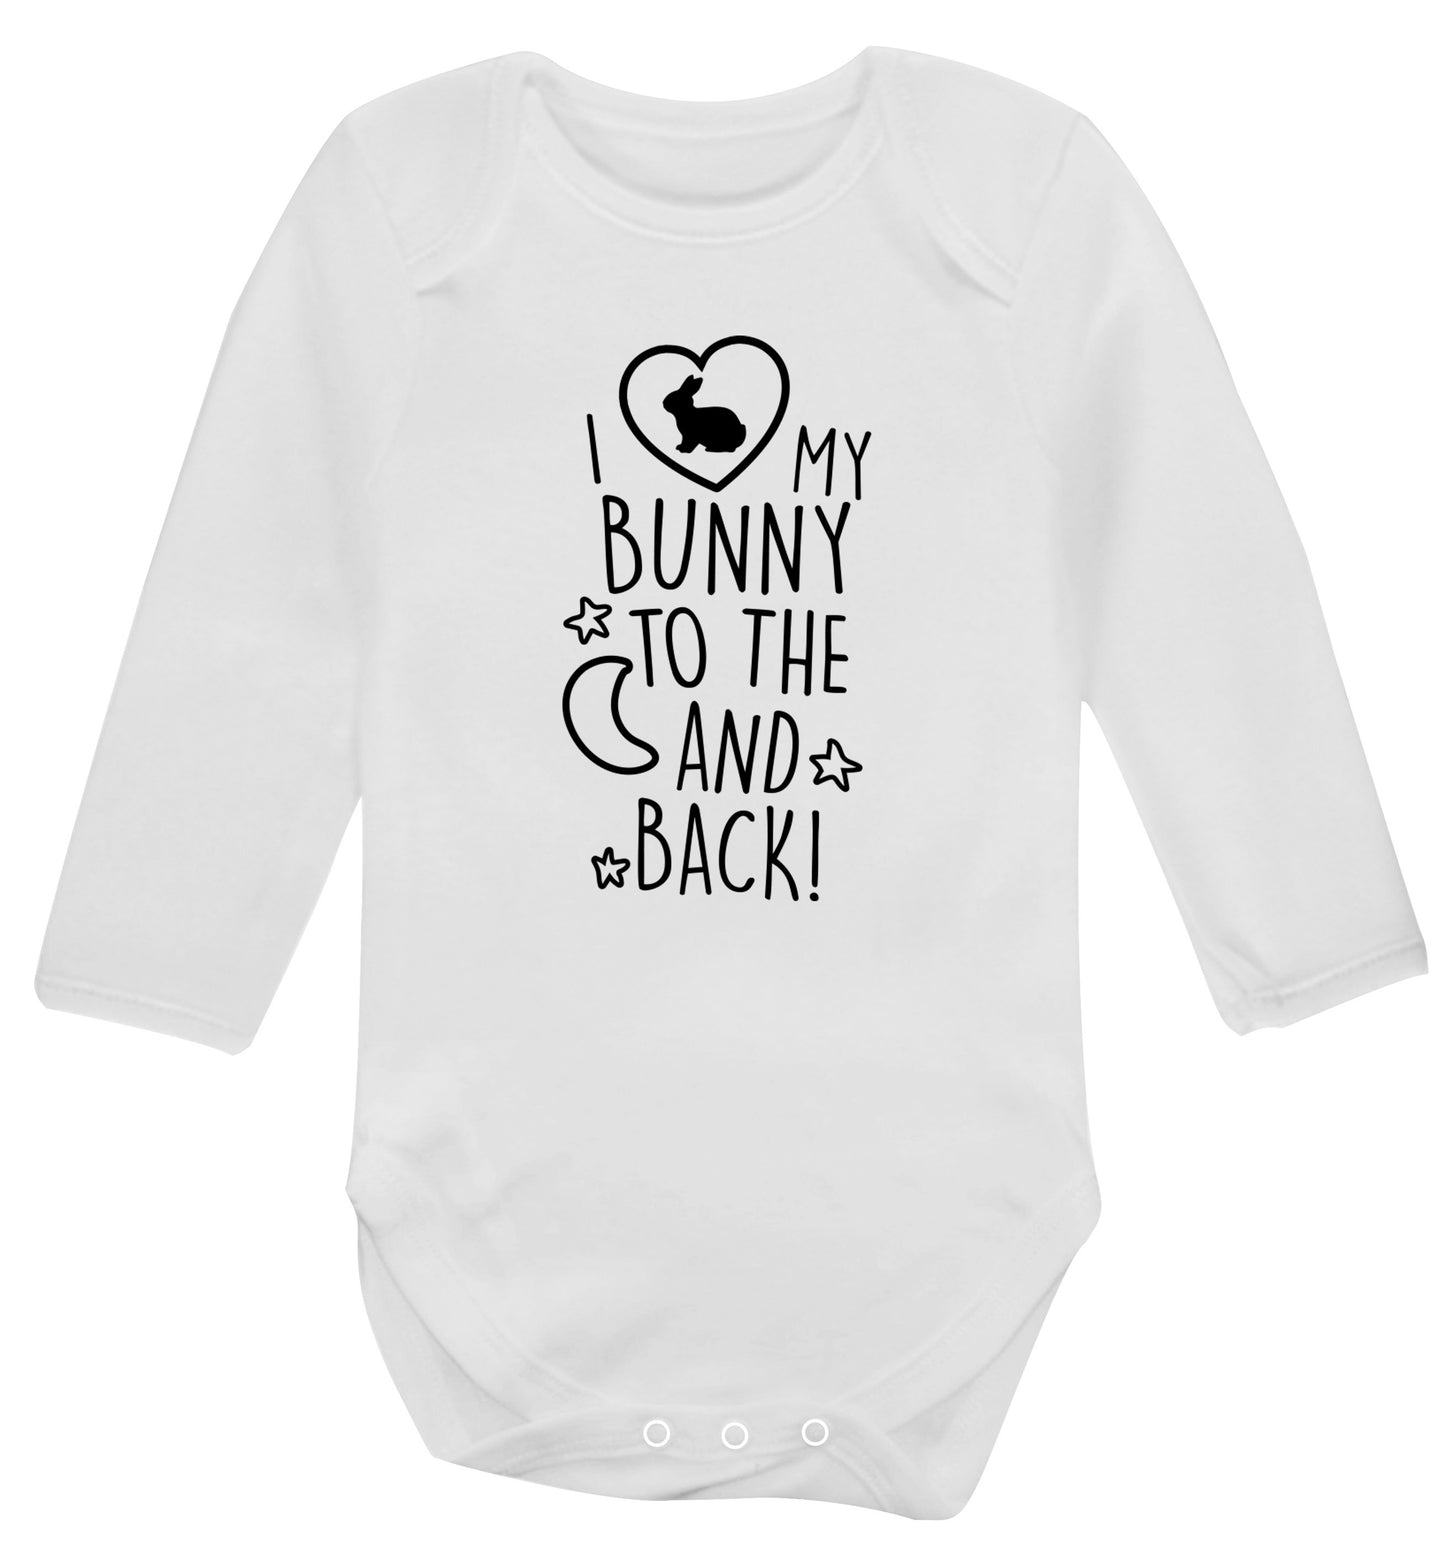 I love my bunny to the moon and back Baby Vest long sleeved white 6-12 months